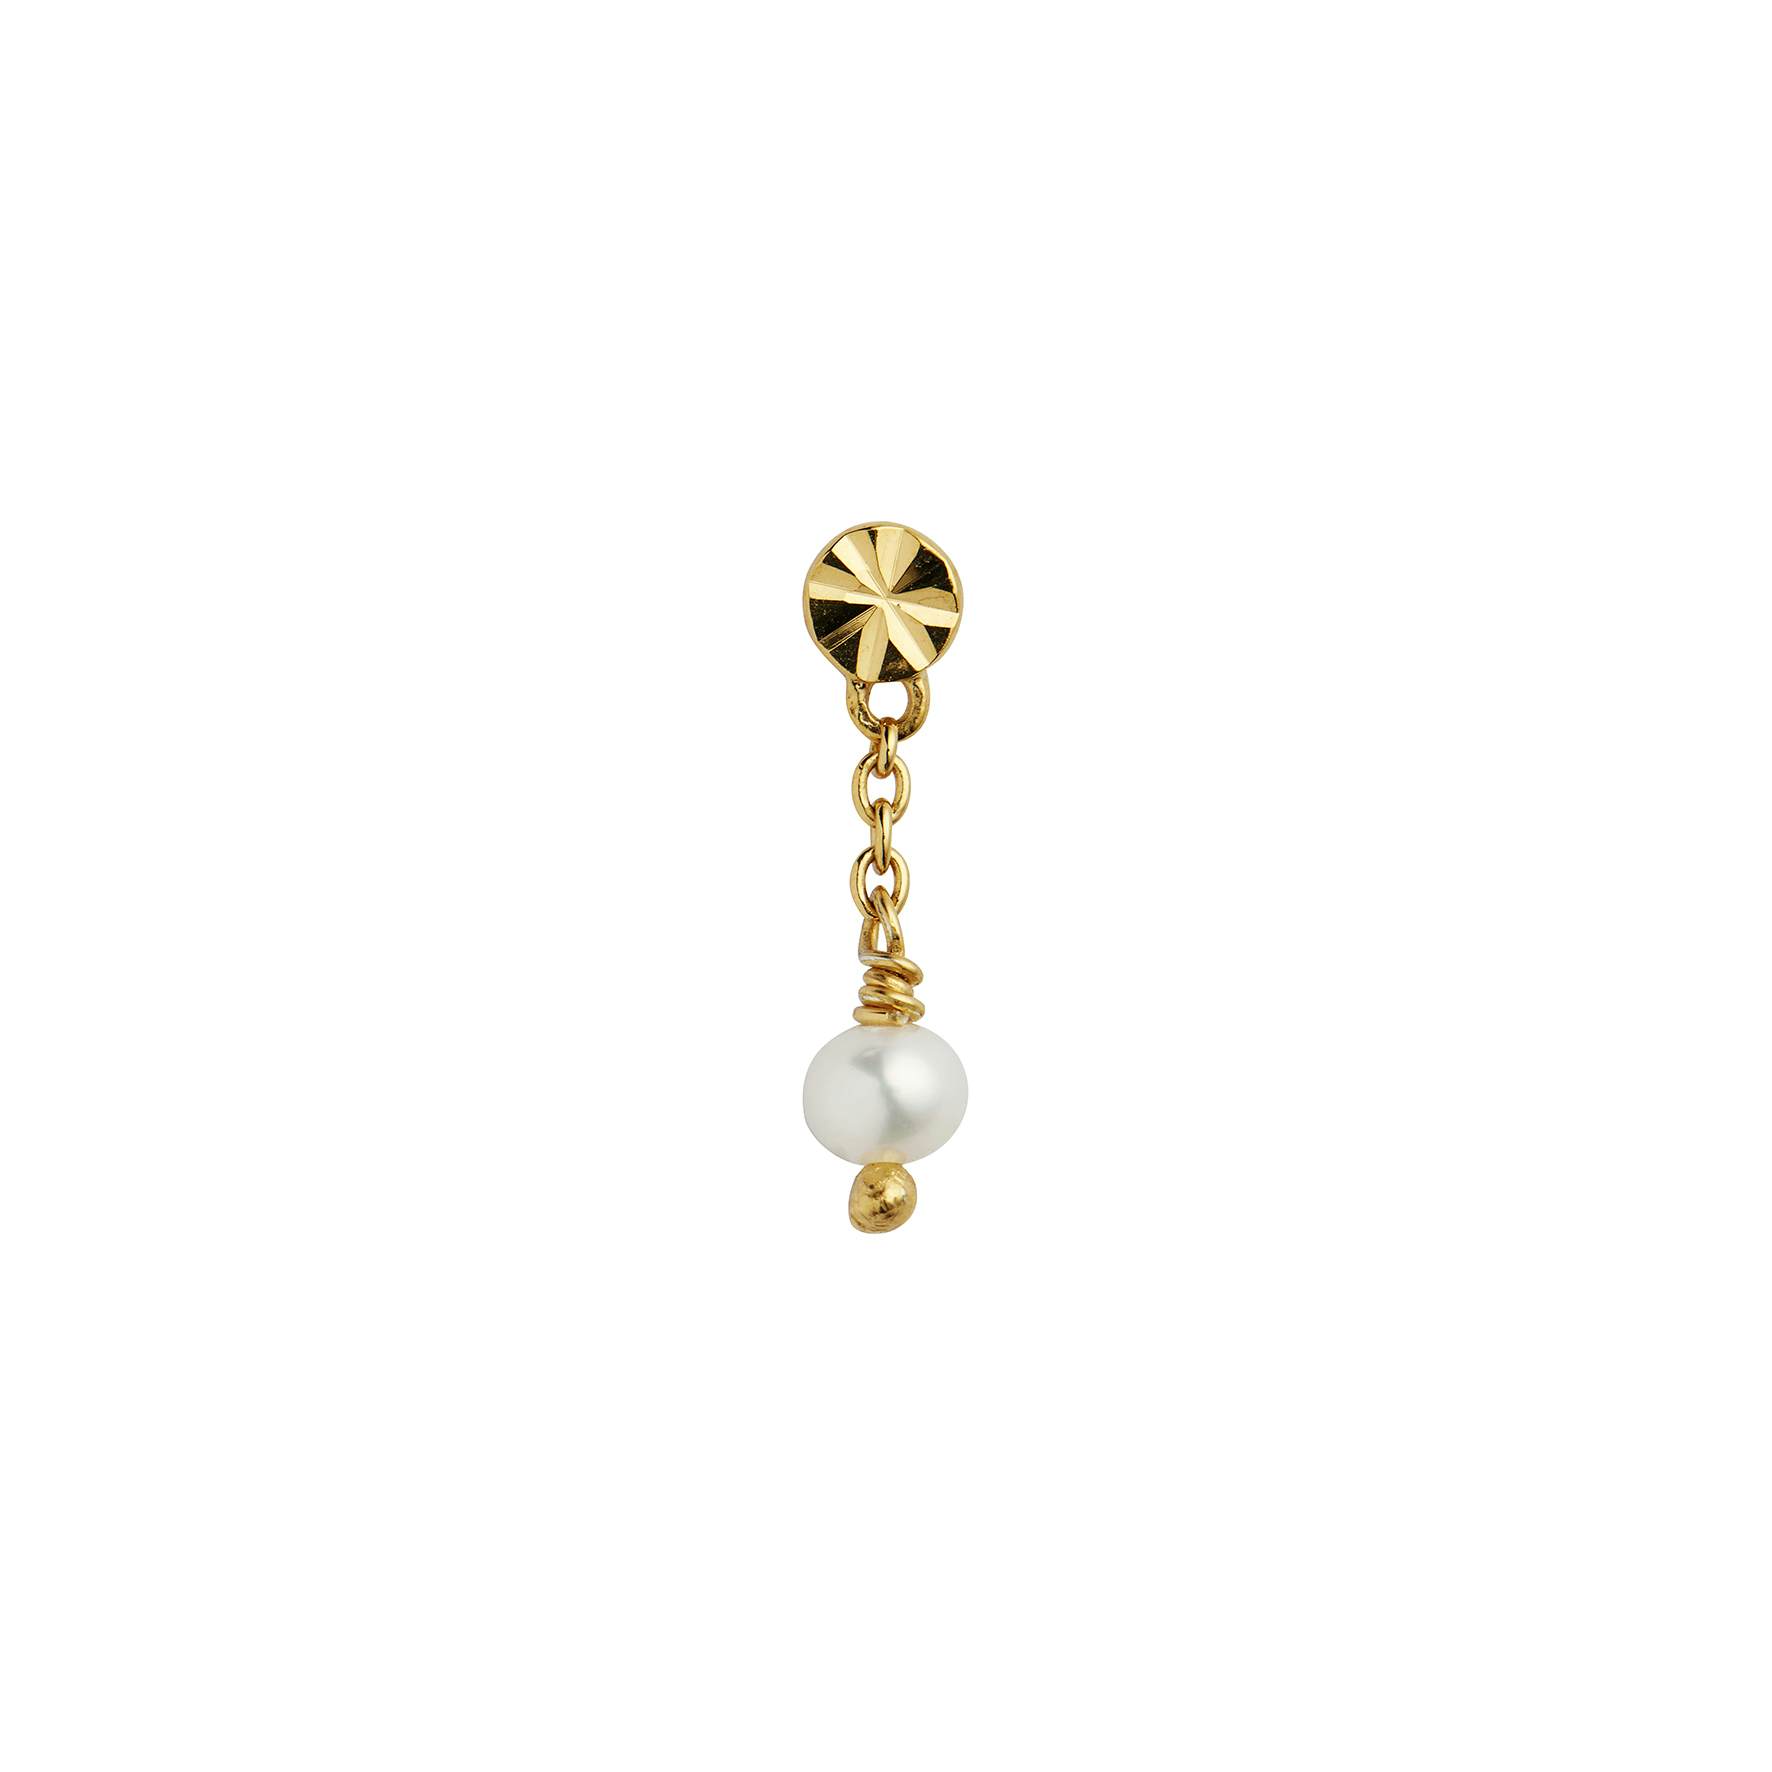 Tres Petit Etoile Earring With Pearl von STINE A Jewelry in Vergoldet-Silber Sterling 925